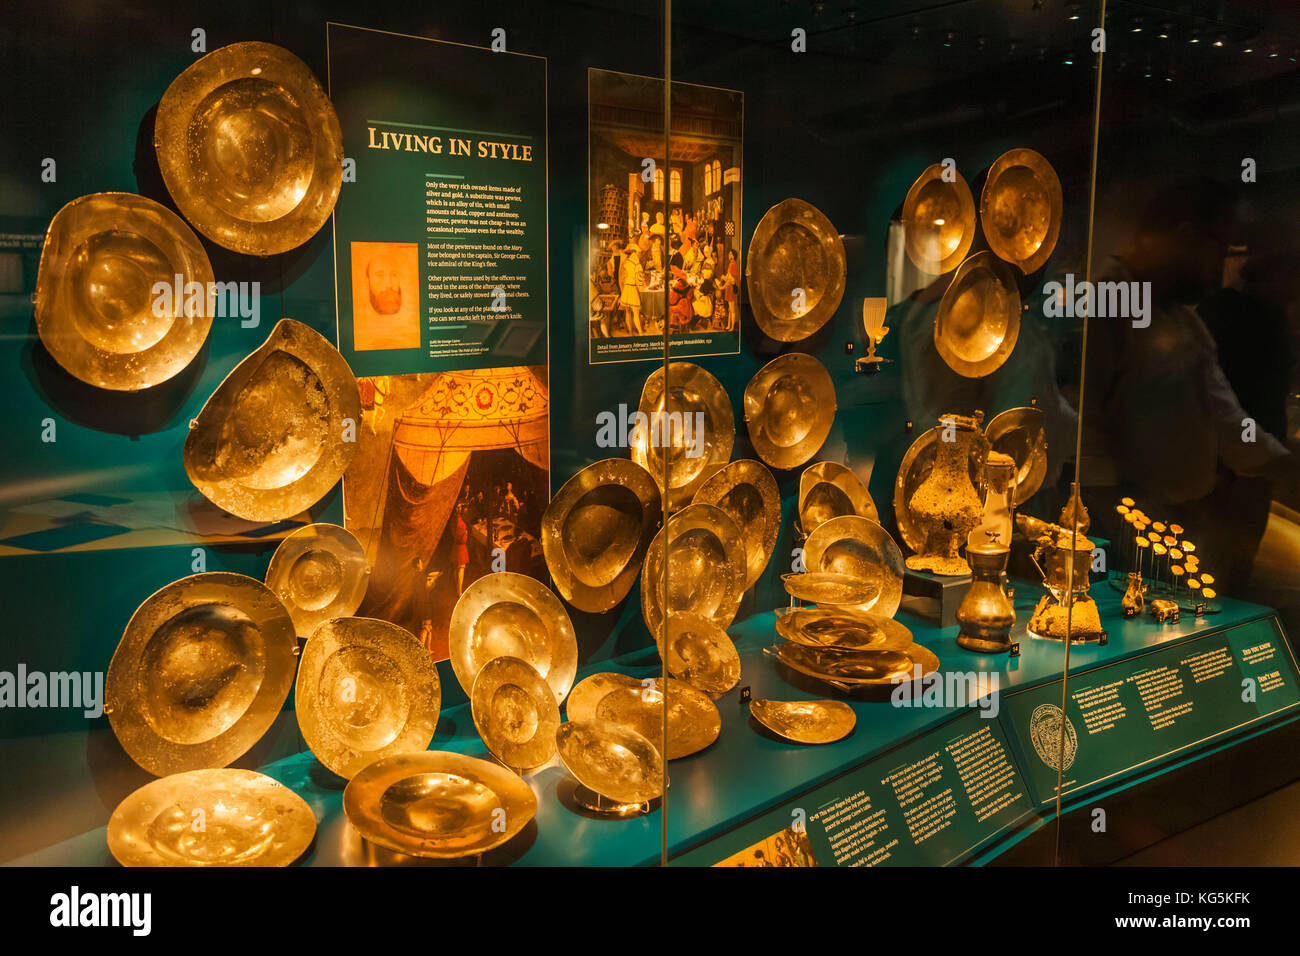 England, Hampshire, Portsmouth, Portsmouth Historic Dockyard, The Mary Rose Museum, Display of Tableware and Gold Coins from The Mary Rose Stock Photo